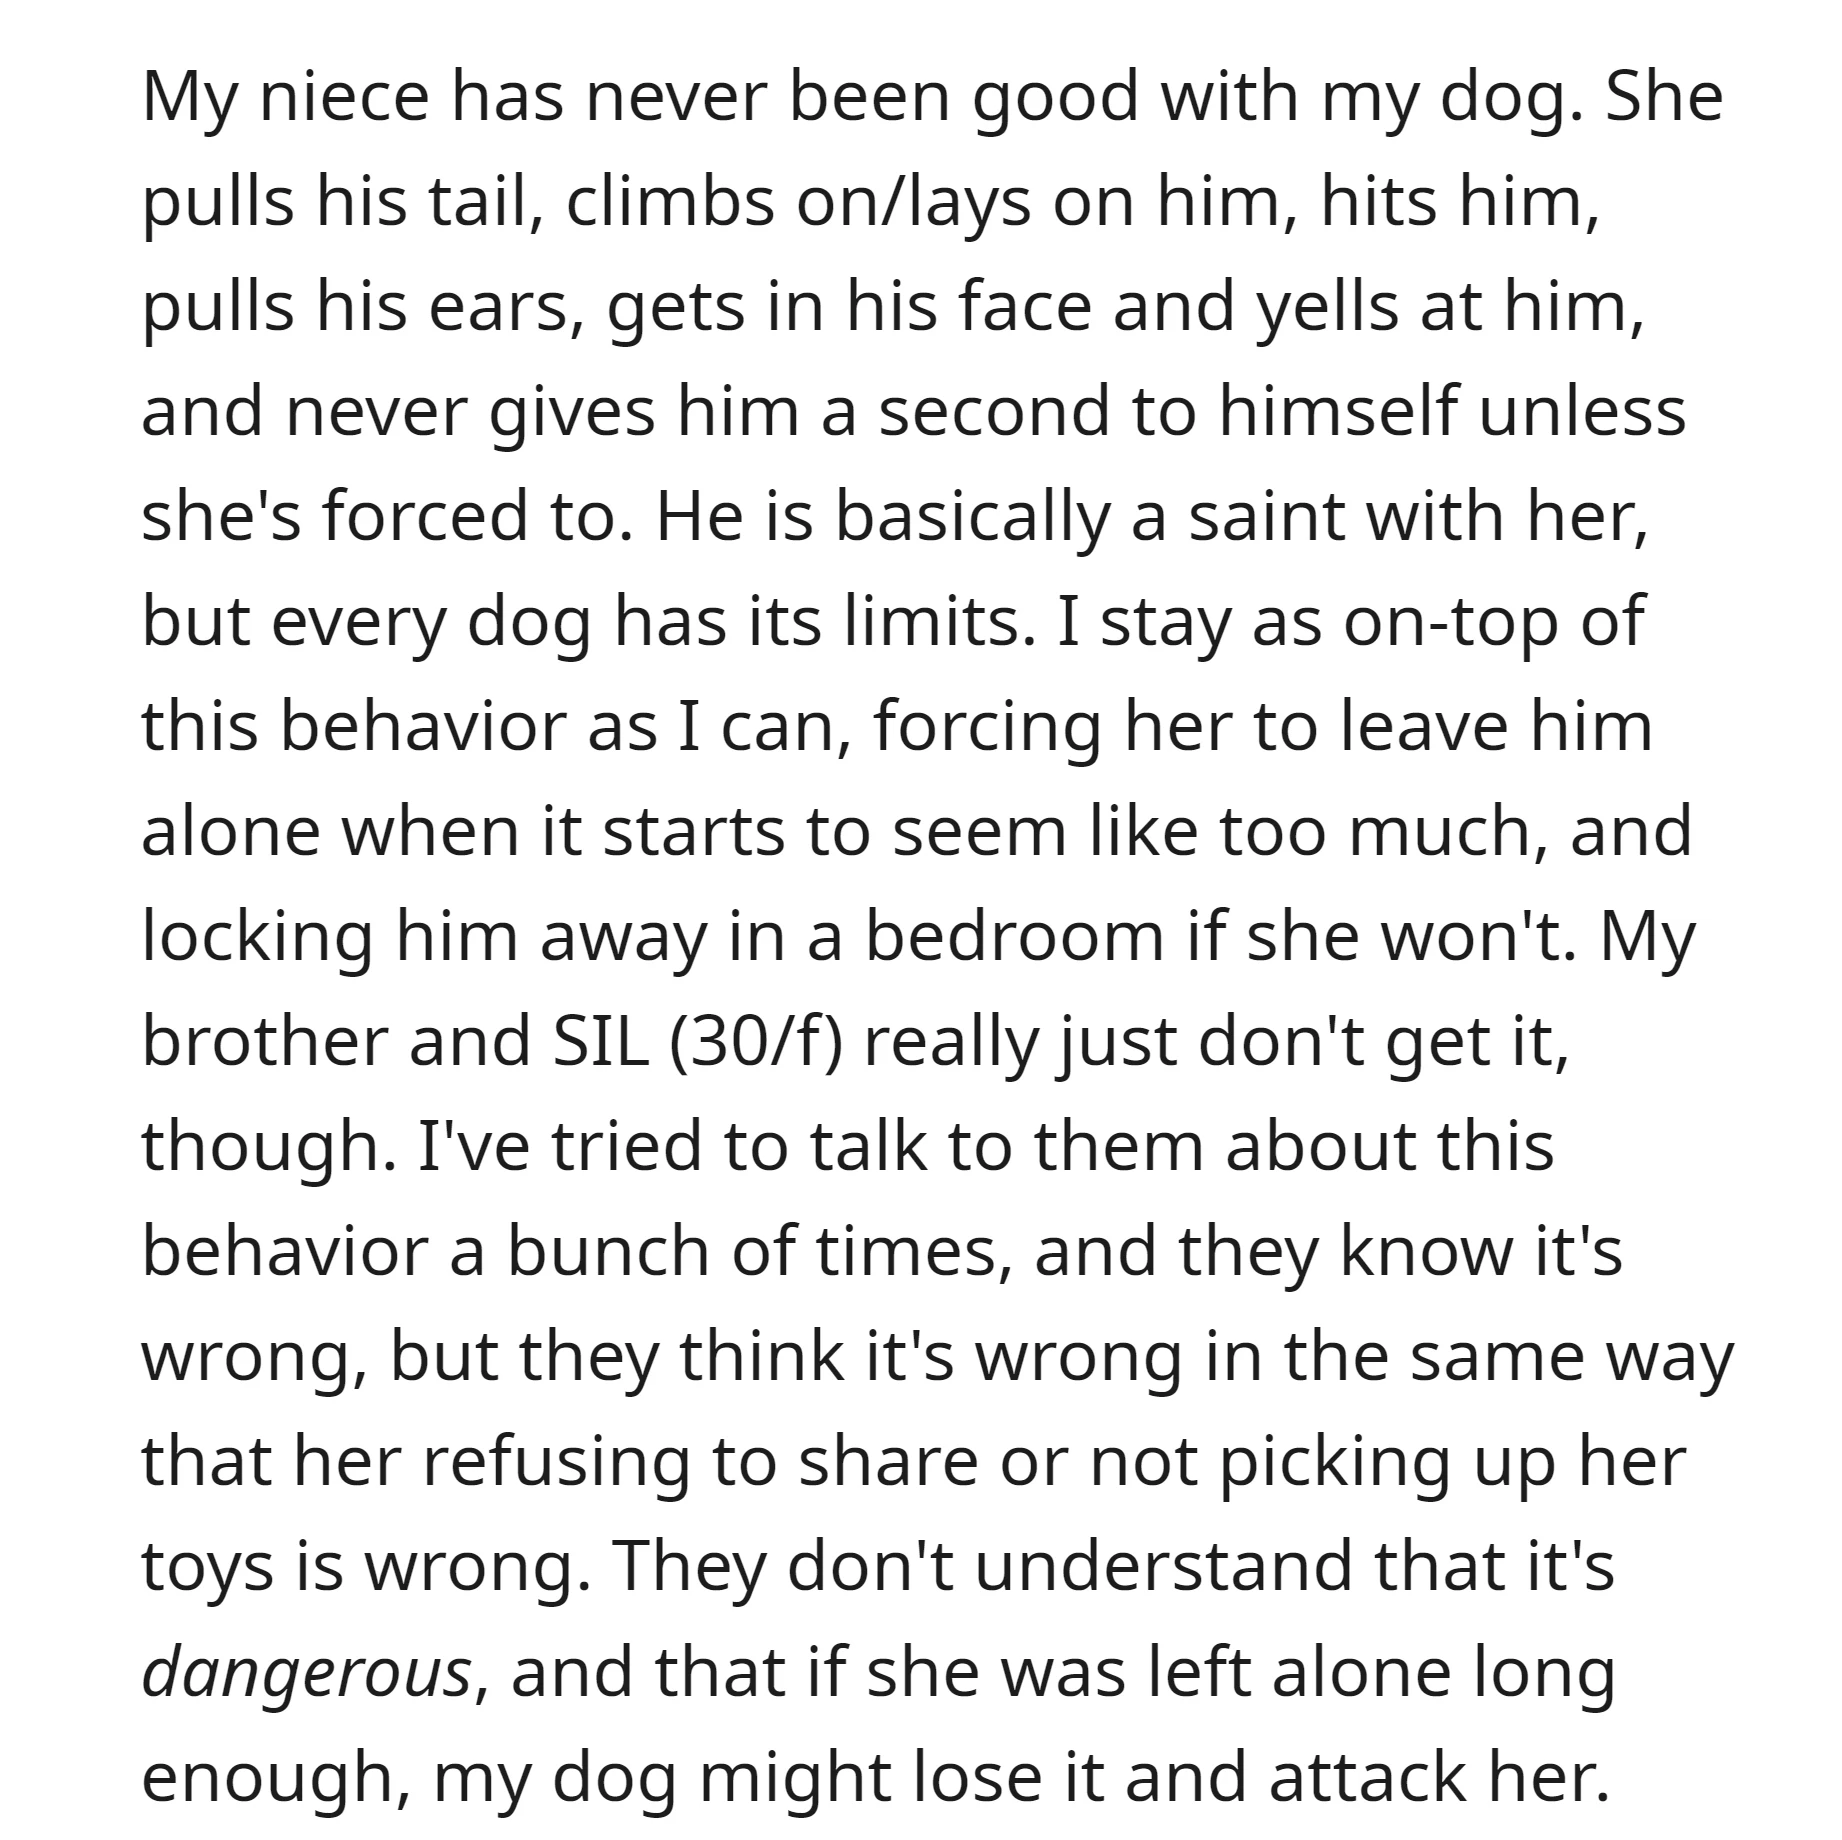 The OP's niece consistently engages in rough behavior with her dog